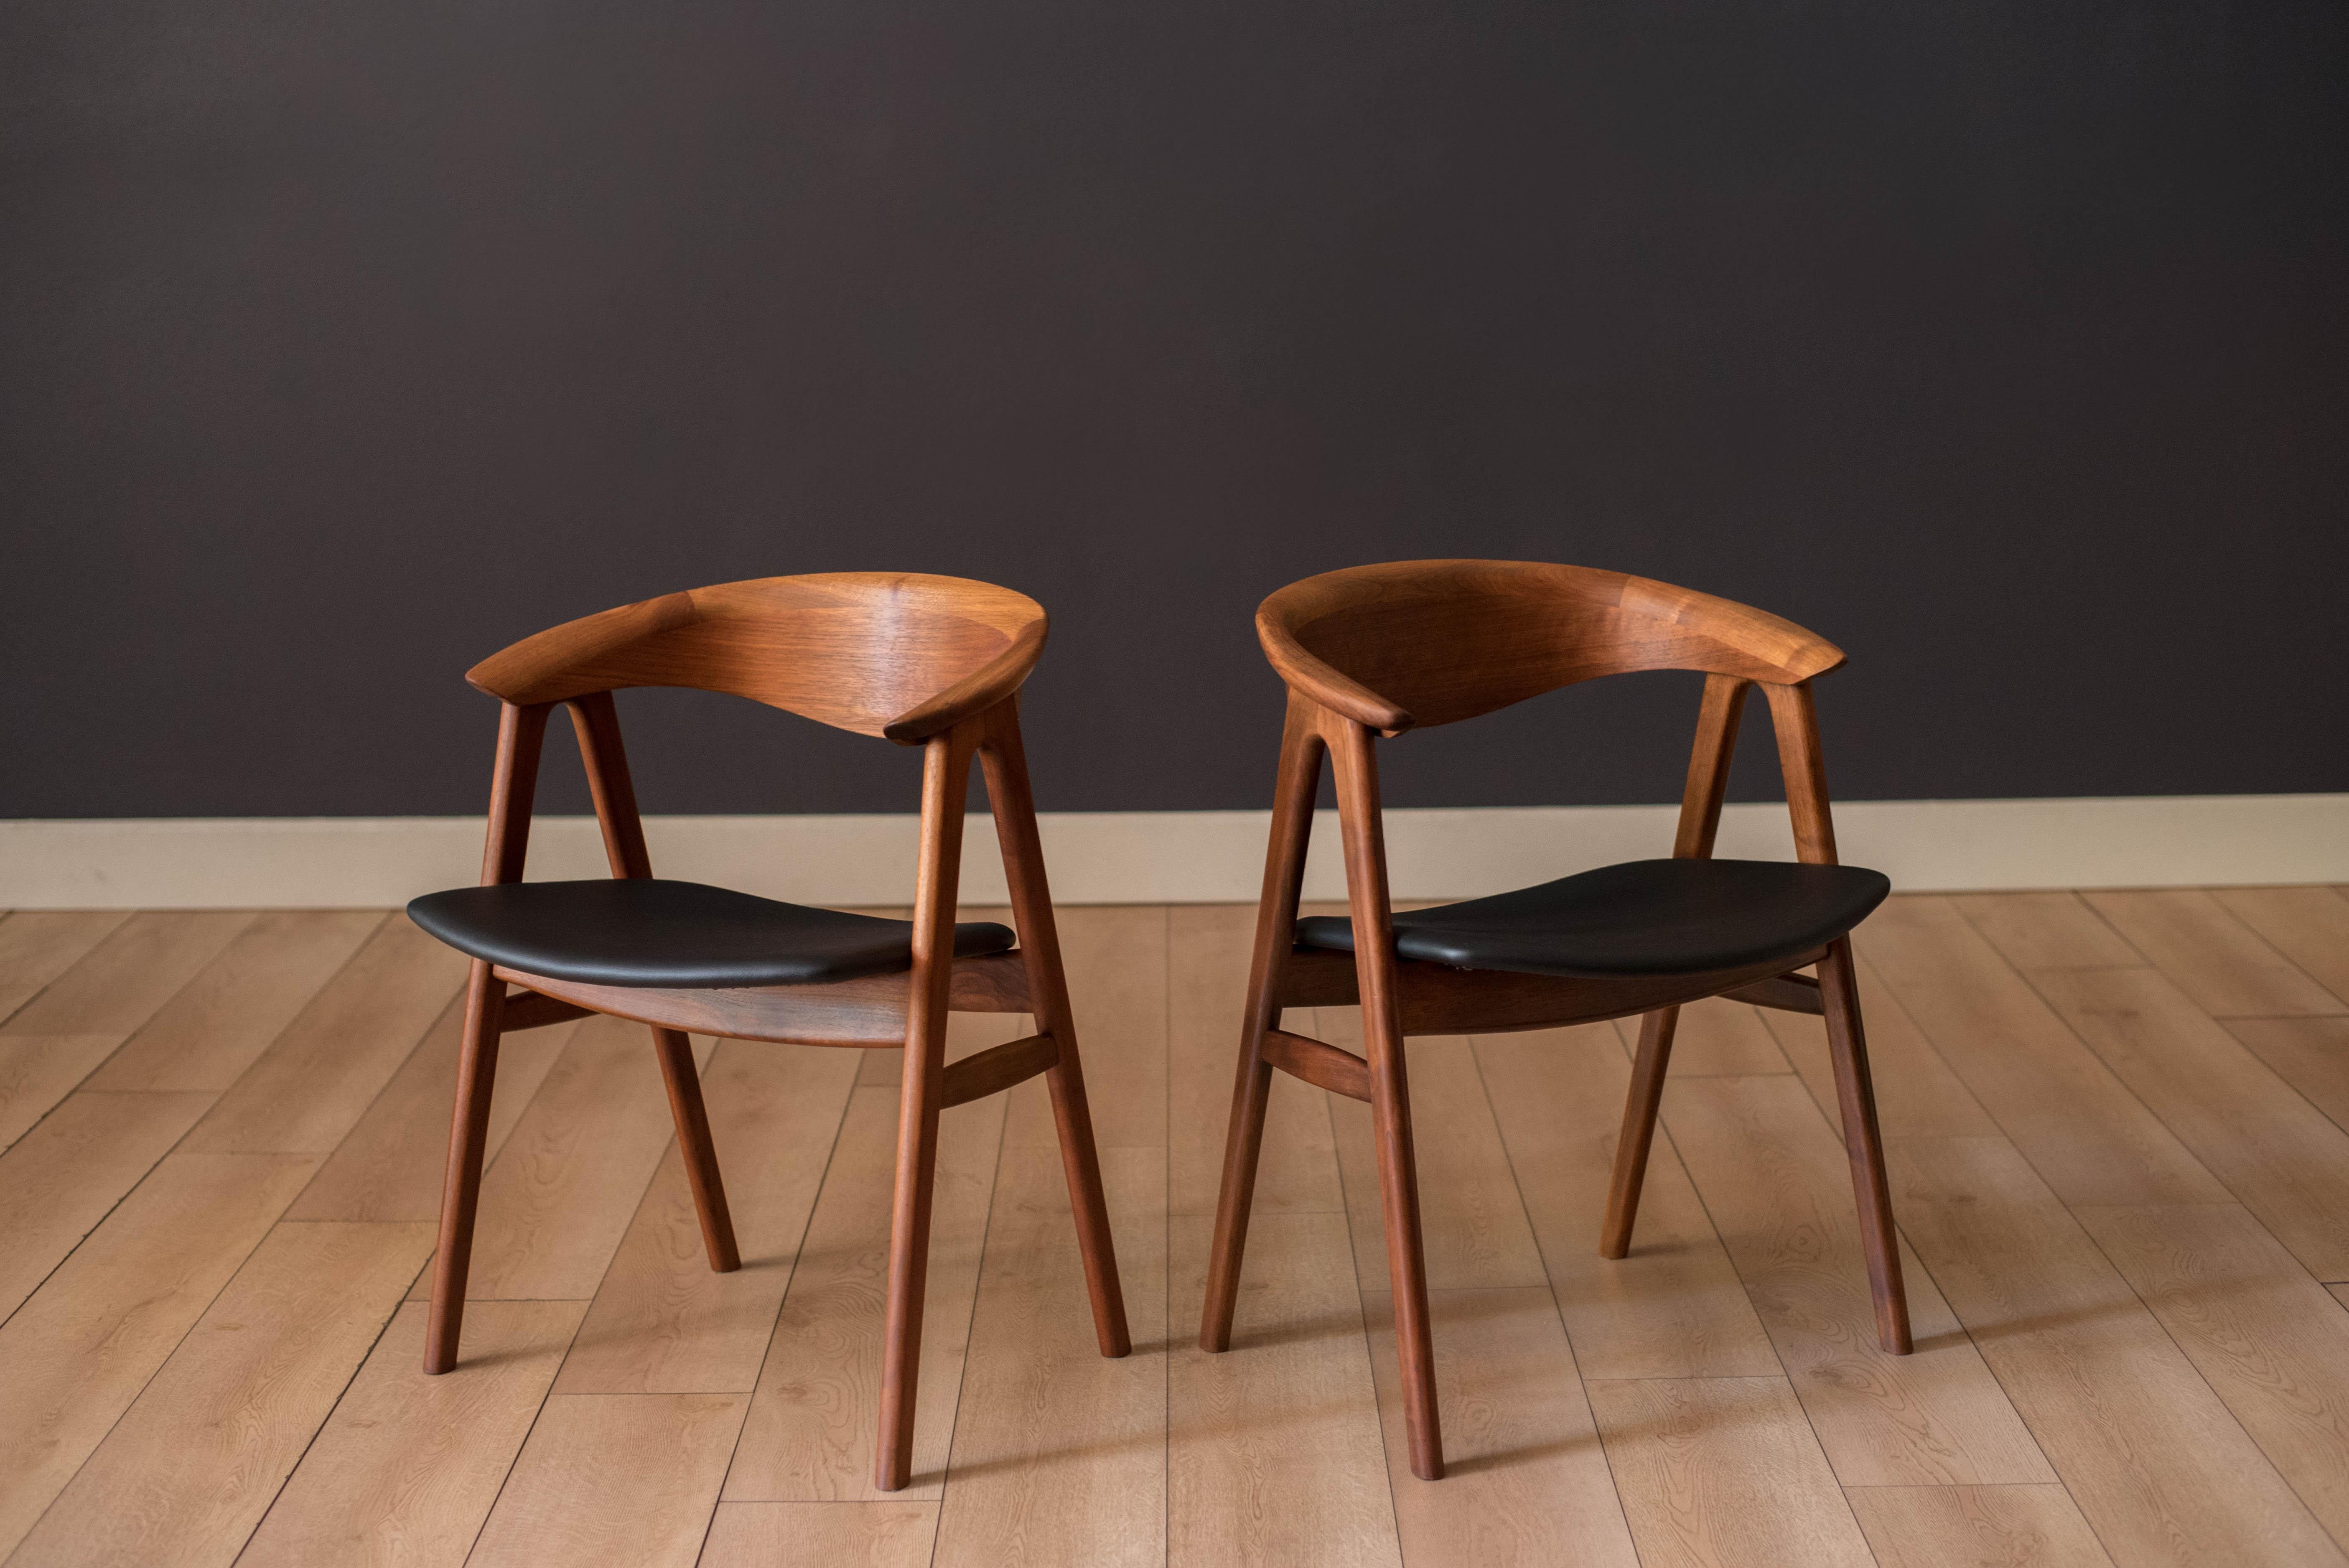 Pair of Mid Century Modern Compass dining chairs in walnut designed by Erik Kirkegaard for Hong Stølefabrik, Denmark model no. 52 imported by Dux. This  side chair set features sculpted backrests and the seats have been newly reupholstered in black